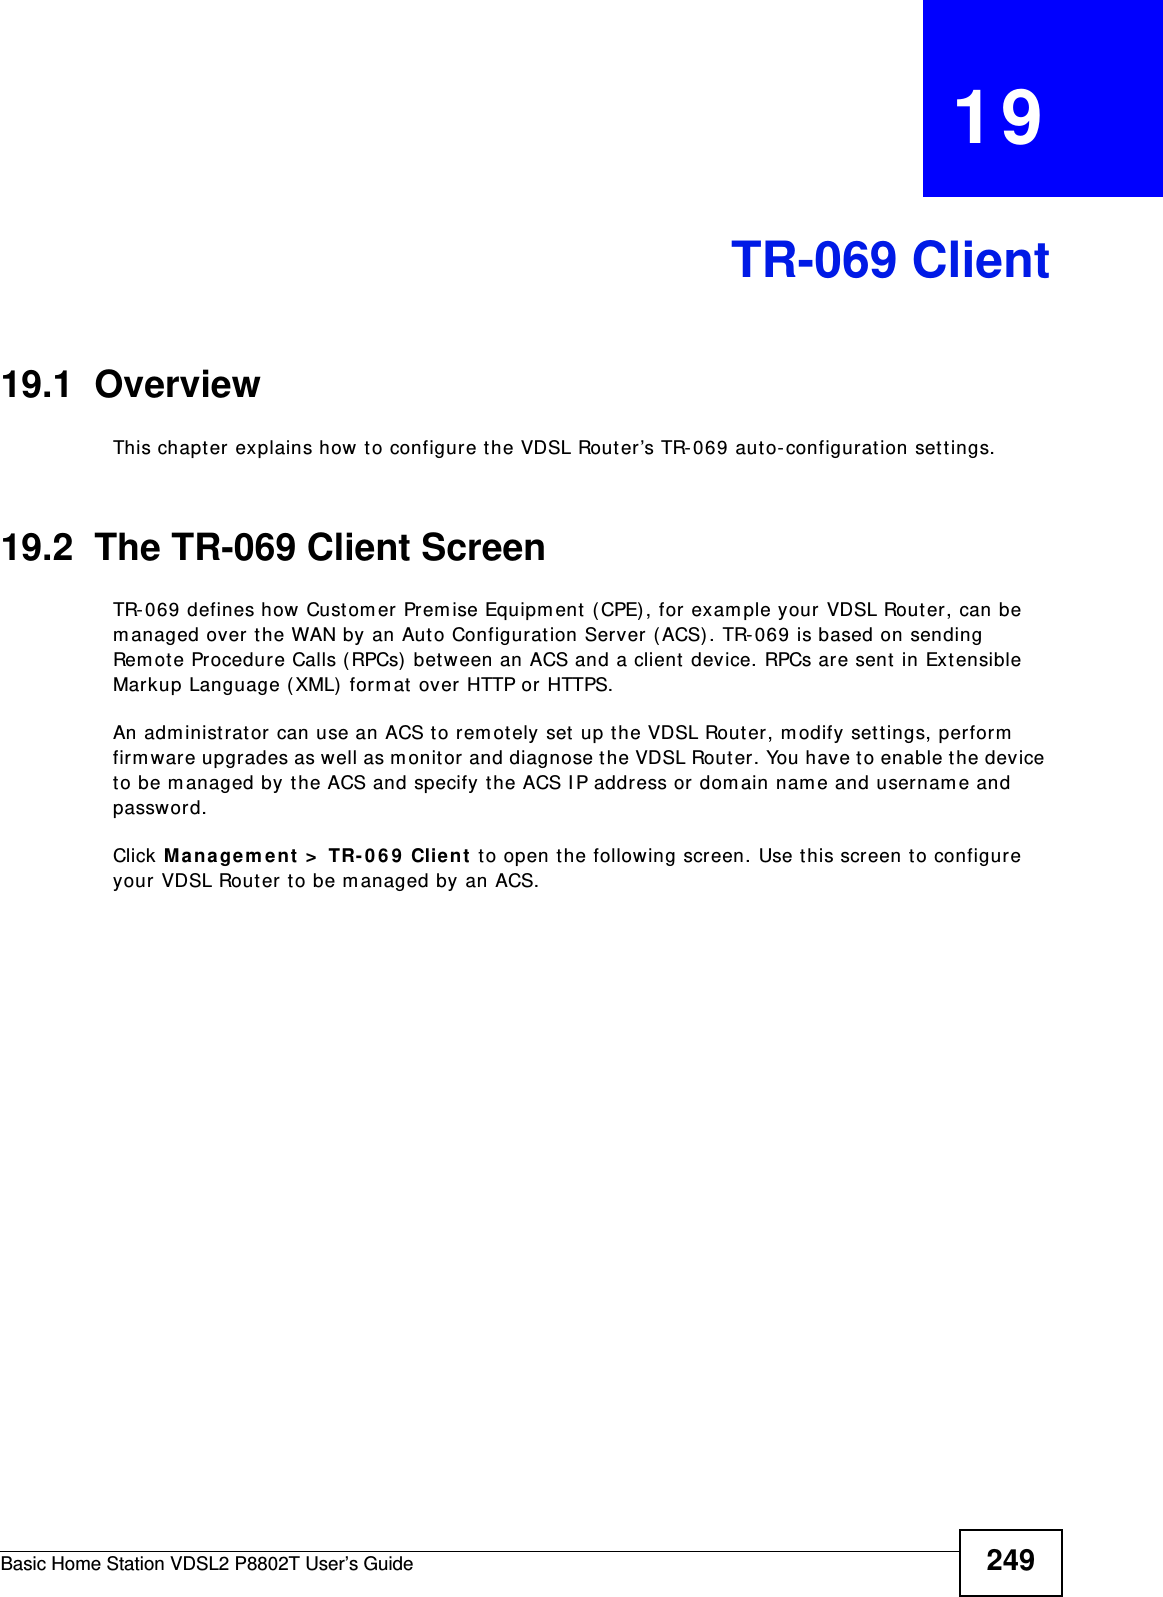 Basic Home Station VDSL2 P8802T User’s Guide 249CHAPTER   19TR-069 Client19.1  OverviewThis chapt er explains how to configur e the VDSL Rout er’s TR- 069 aut o-configuration settings.19.2  The TR-069 Client ScreenTR-069 defines how Cust omer Prem ise Equipm ent  ( CPE), for exam ple your VDSL Router , can be m anaged over t he WAN by an Auto Configurat ion Server (ACS) . TR- 069 is based on sending Remot e Procedure Calls ( RPCs)  bet ween an ACS and a client  device. RPCs are sent in Ext ensible Mar kup Language (XML)  form at  over HTTP or HTTPS. An adm inist rat or can use an ACS to rem ot ely set  up t he VDSL Router, m odify set t ings, perform  firm ware upgrades as well as m onitor and diagnose t he VDSL Router. You have t o enable t he device to be m anaged by the ACS and specify the ACS I P address or dom ain name and usernam e and password.Click Managem ent  &gt;  TR- 0 6 9  Clie nt  t o open the following screen. Use t his screen to configure your VDSL Router to be m anaged by an ACS. 